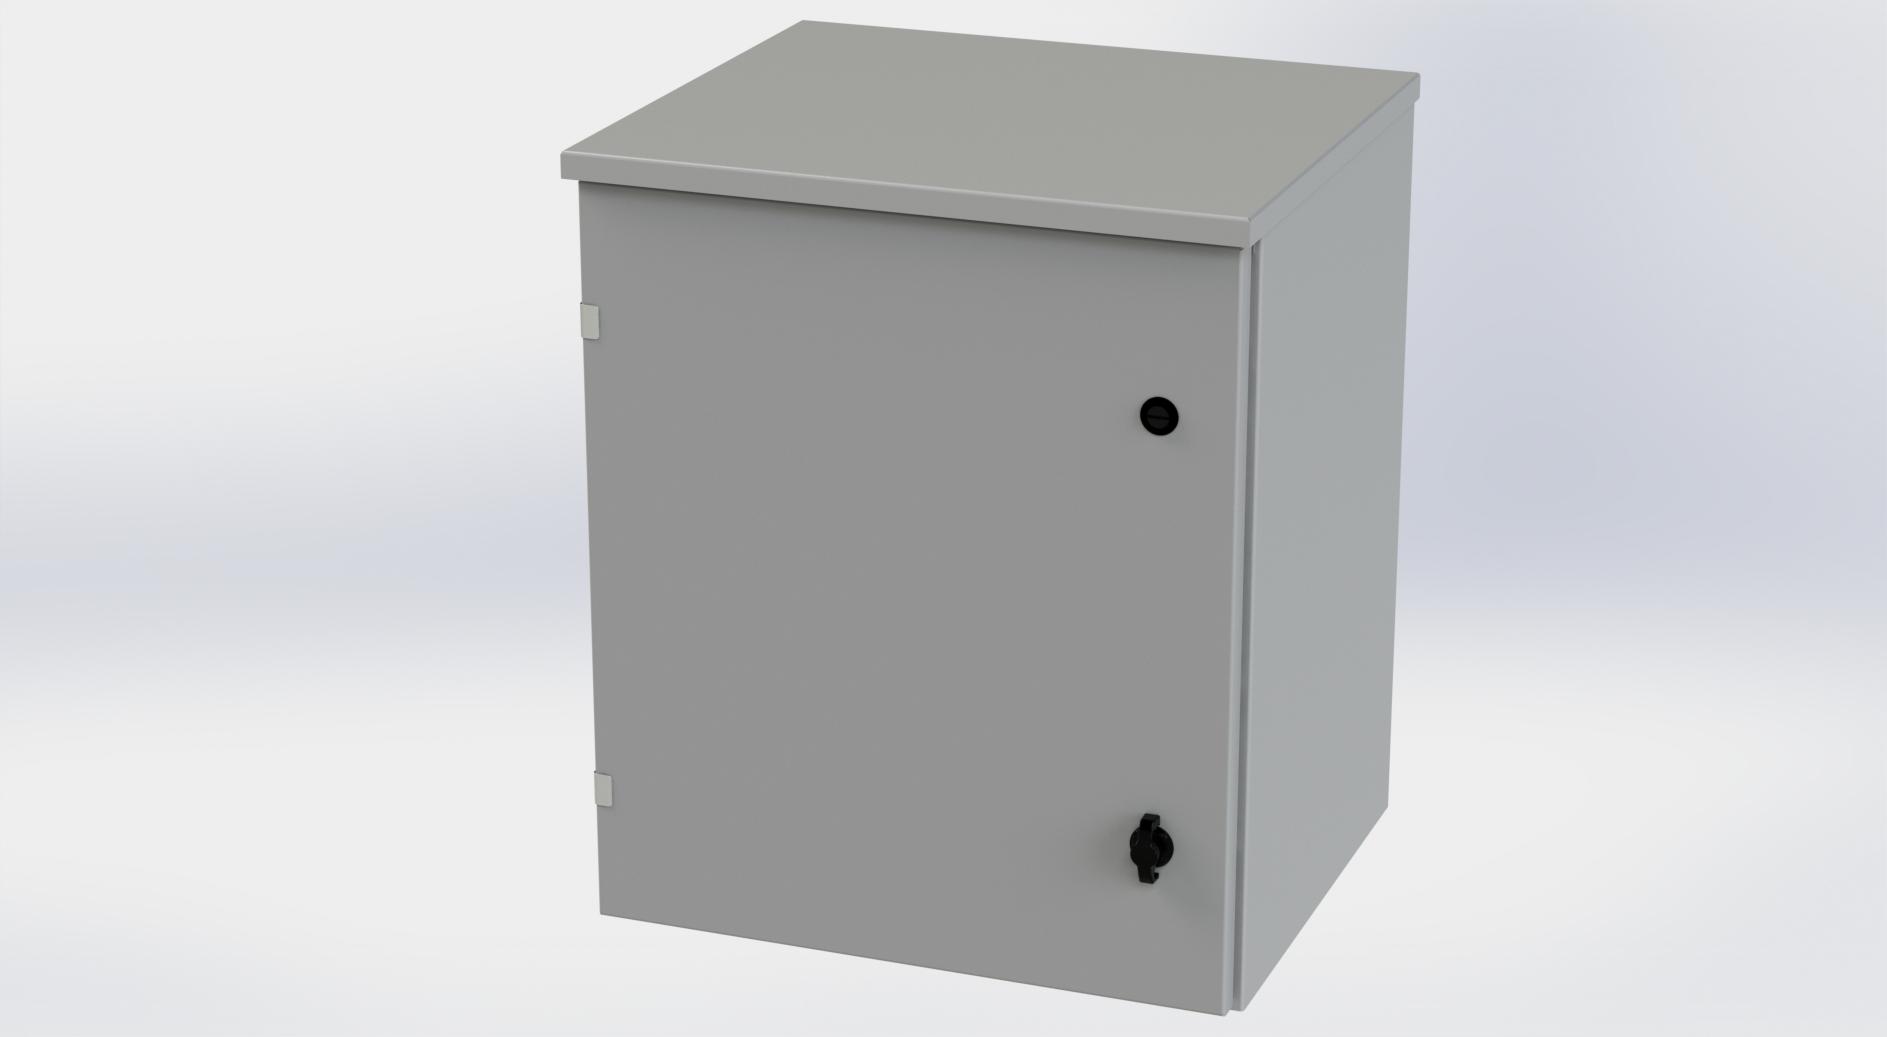 Saginaw Control SCE-24R2016LP Type-3R Hinged Cover Enclosure, Height:24.00", Width:20.00", Depth:16.00", ANSI-61 gray powder coating inside and out. Optional sub-panels are powder coated white.